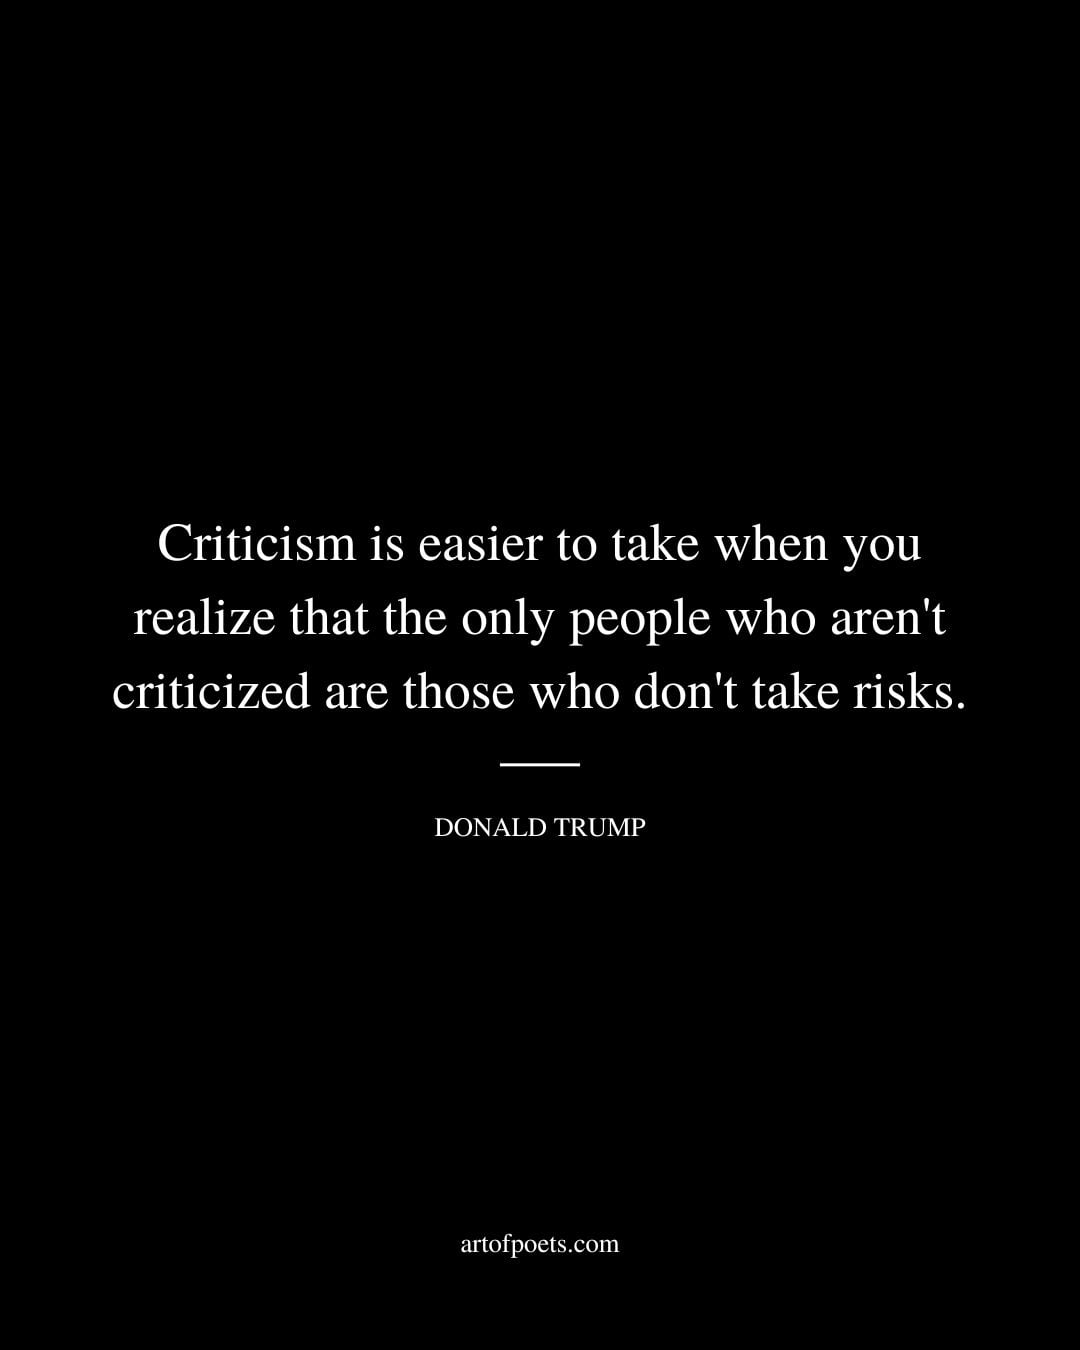 Criticism is easier to take when you realize that the only people who arent criticized are those who dont take risks